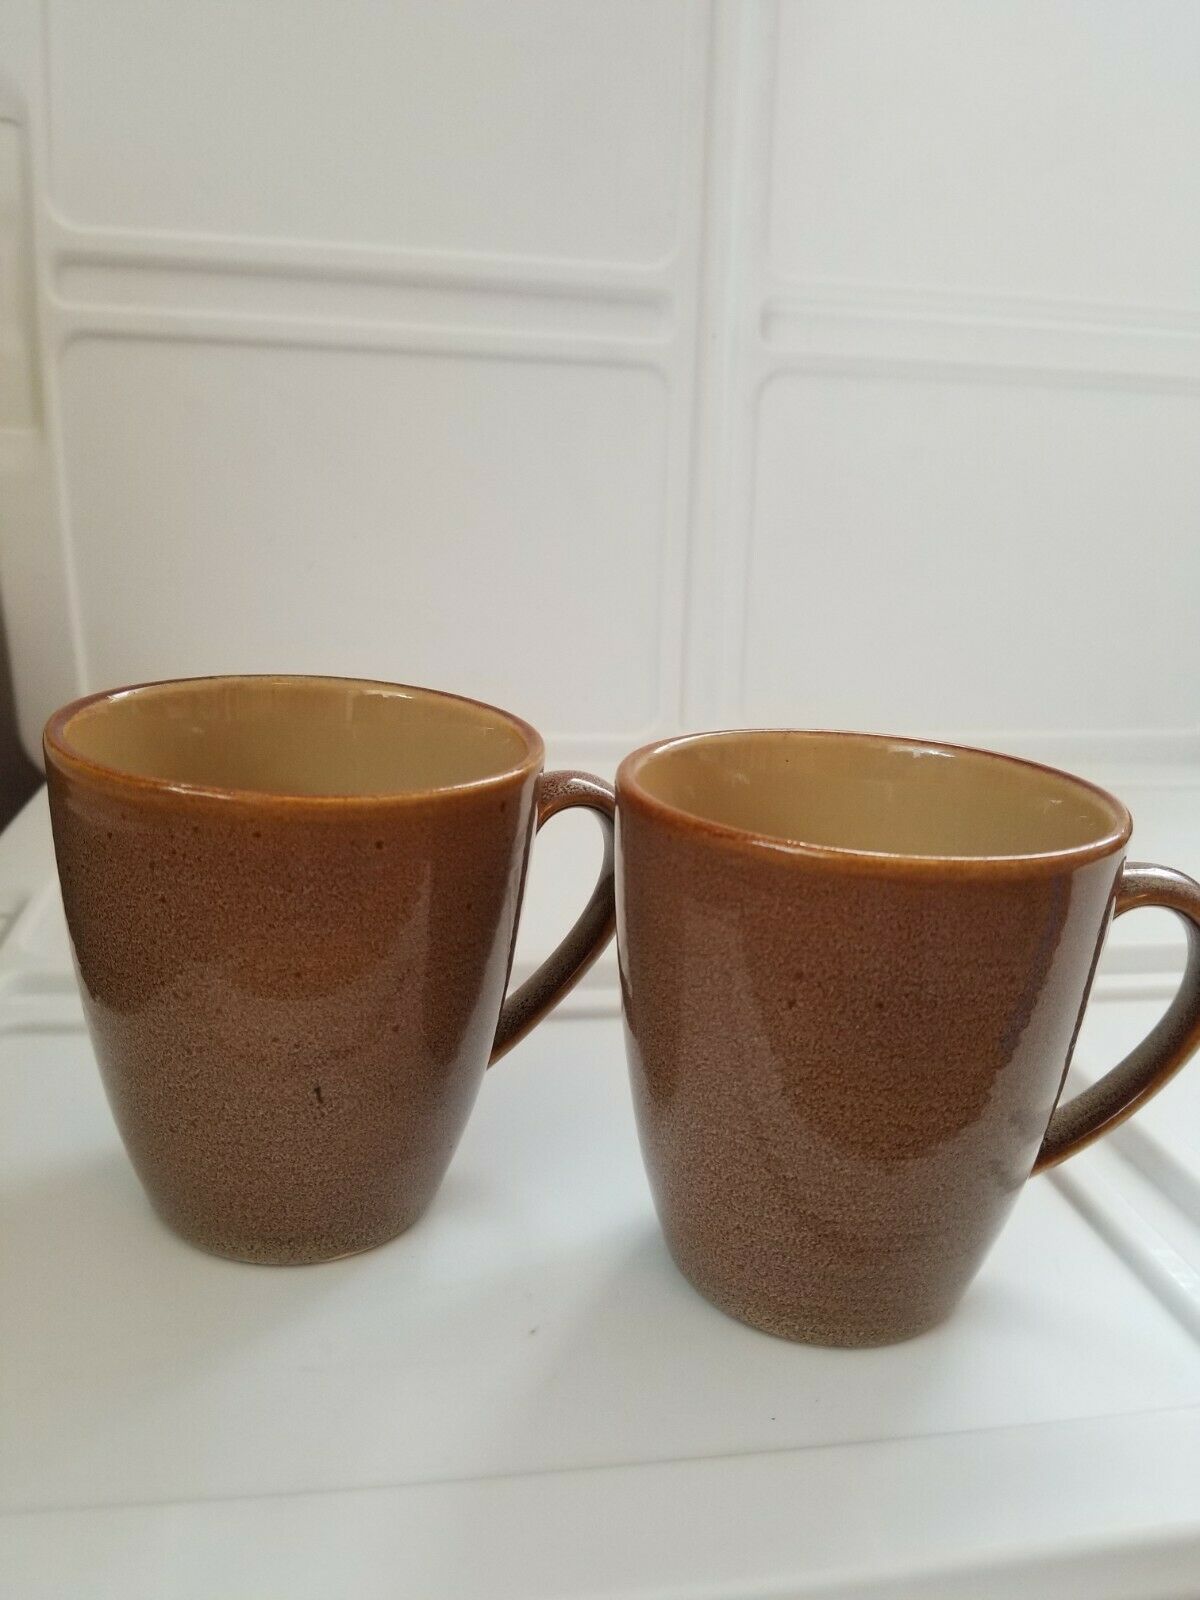 Pair Of Sango Roma 4815 Caramel Coffee/tea Mugs. Preowned Excellent Condition